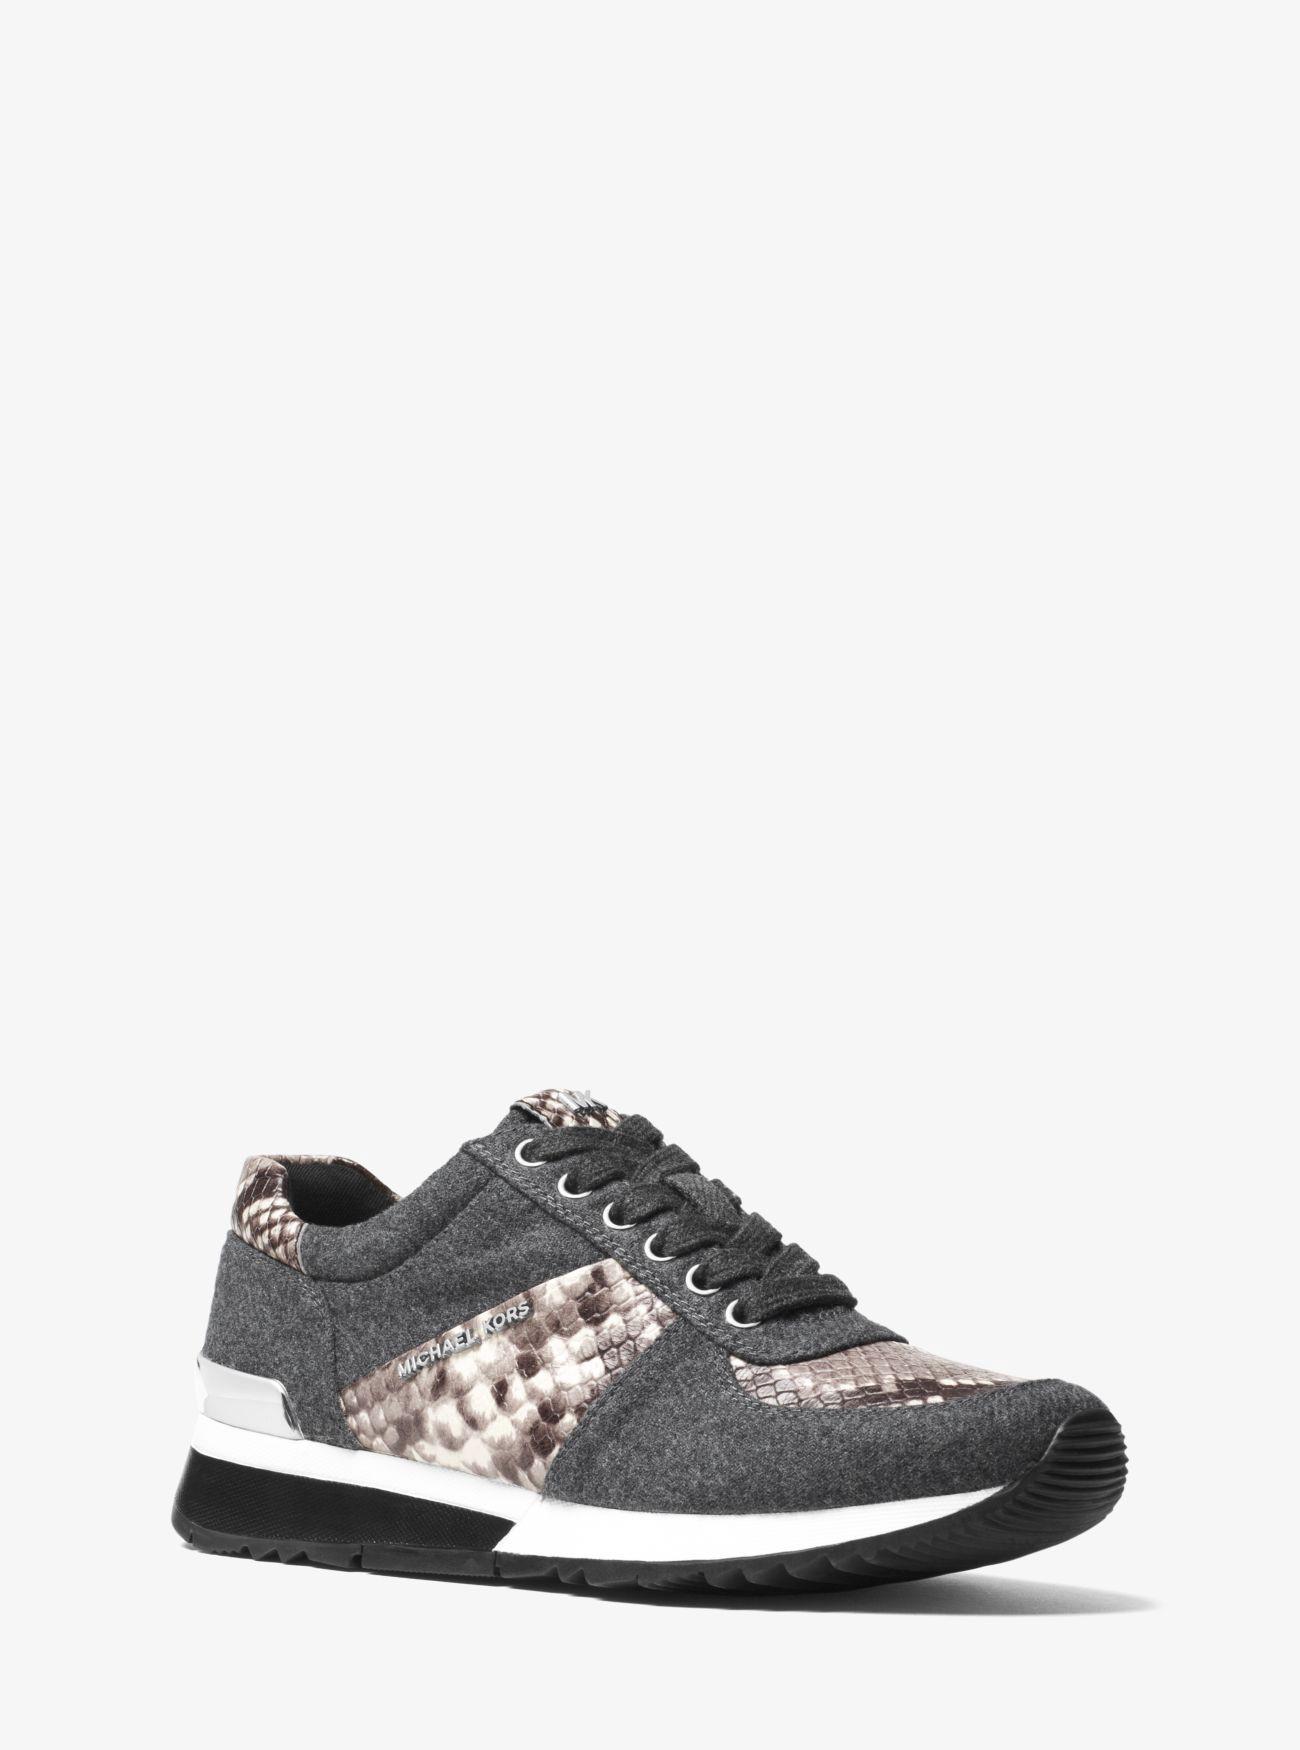 Michael Kors Allie Flannel And Embossed-leather Sneaker In Charcoal/nat ...